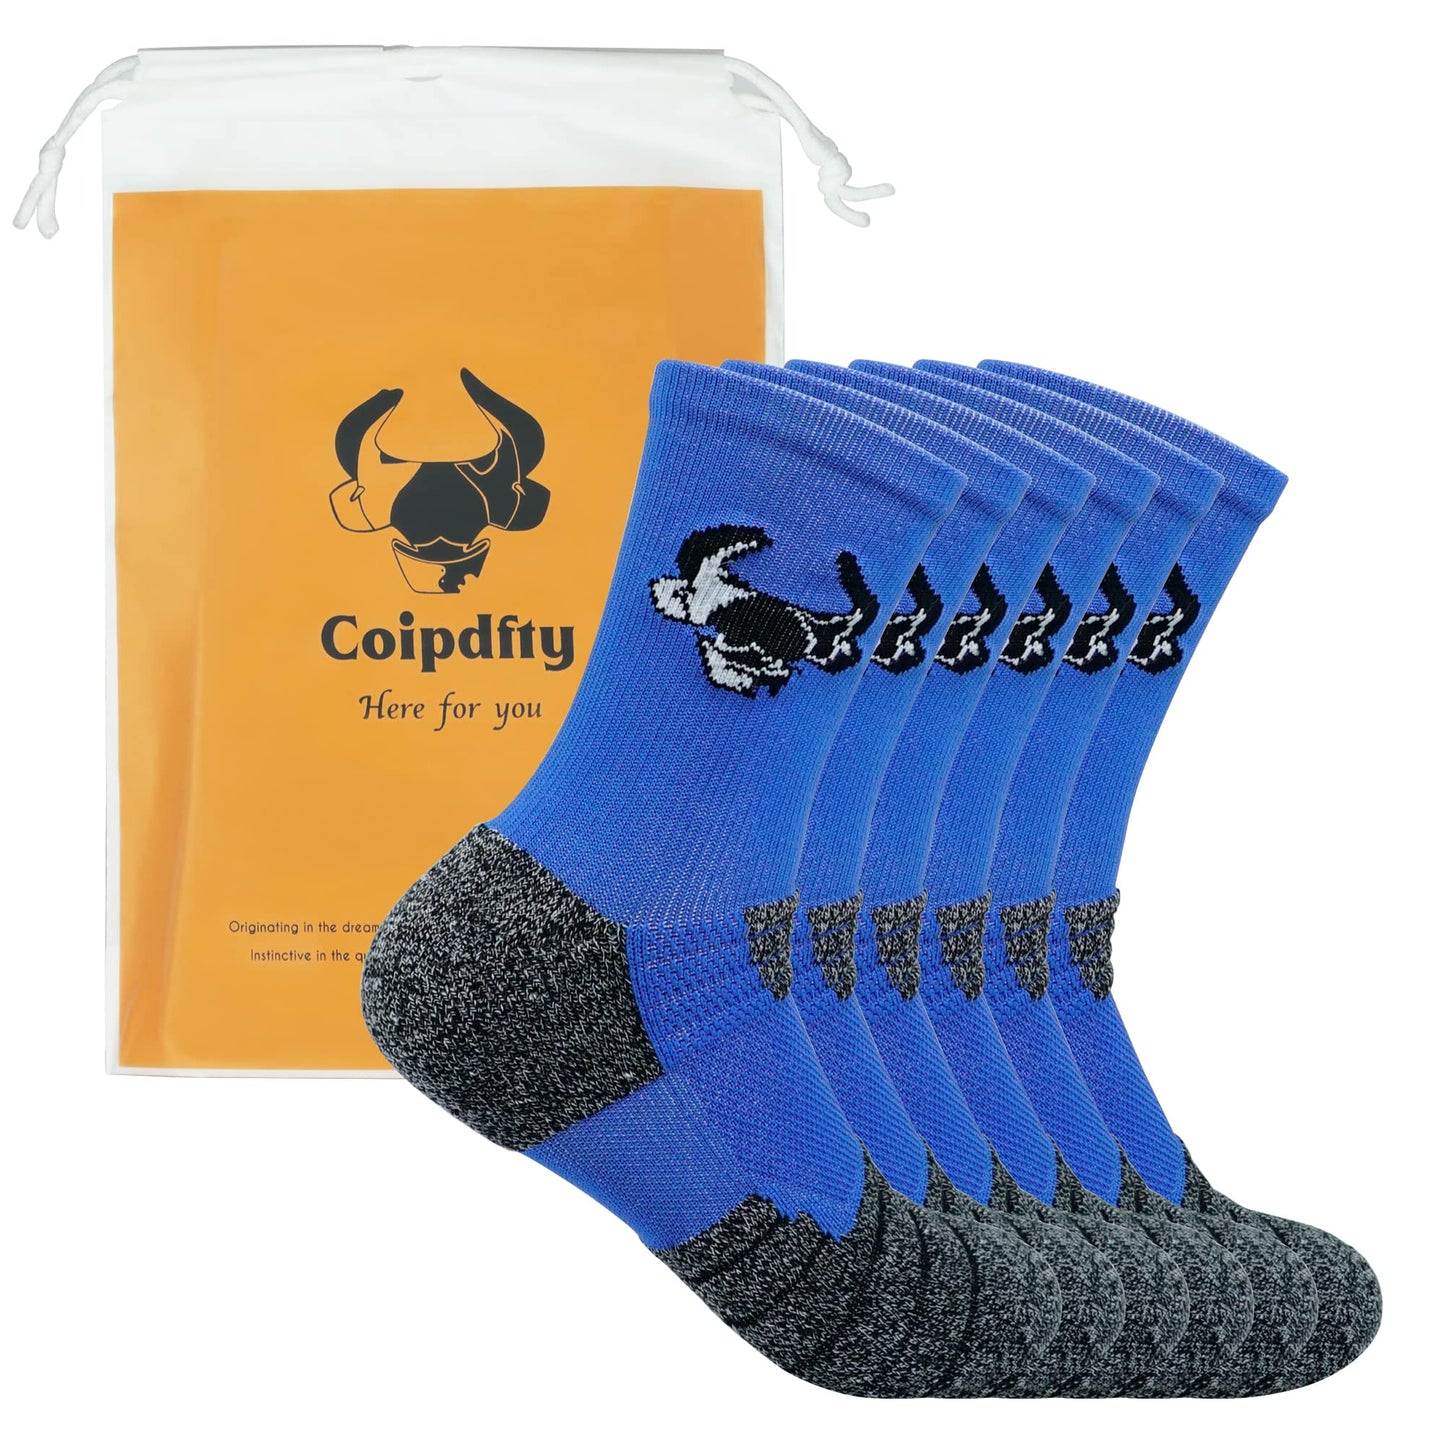 Coipdfty Grey Ankle Socks,6 Pairs Men No Show Socks,Men Low Cut Golf Socks For Breathable And Comfortable